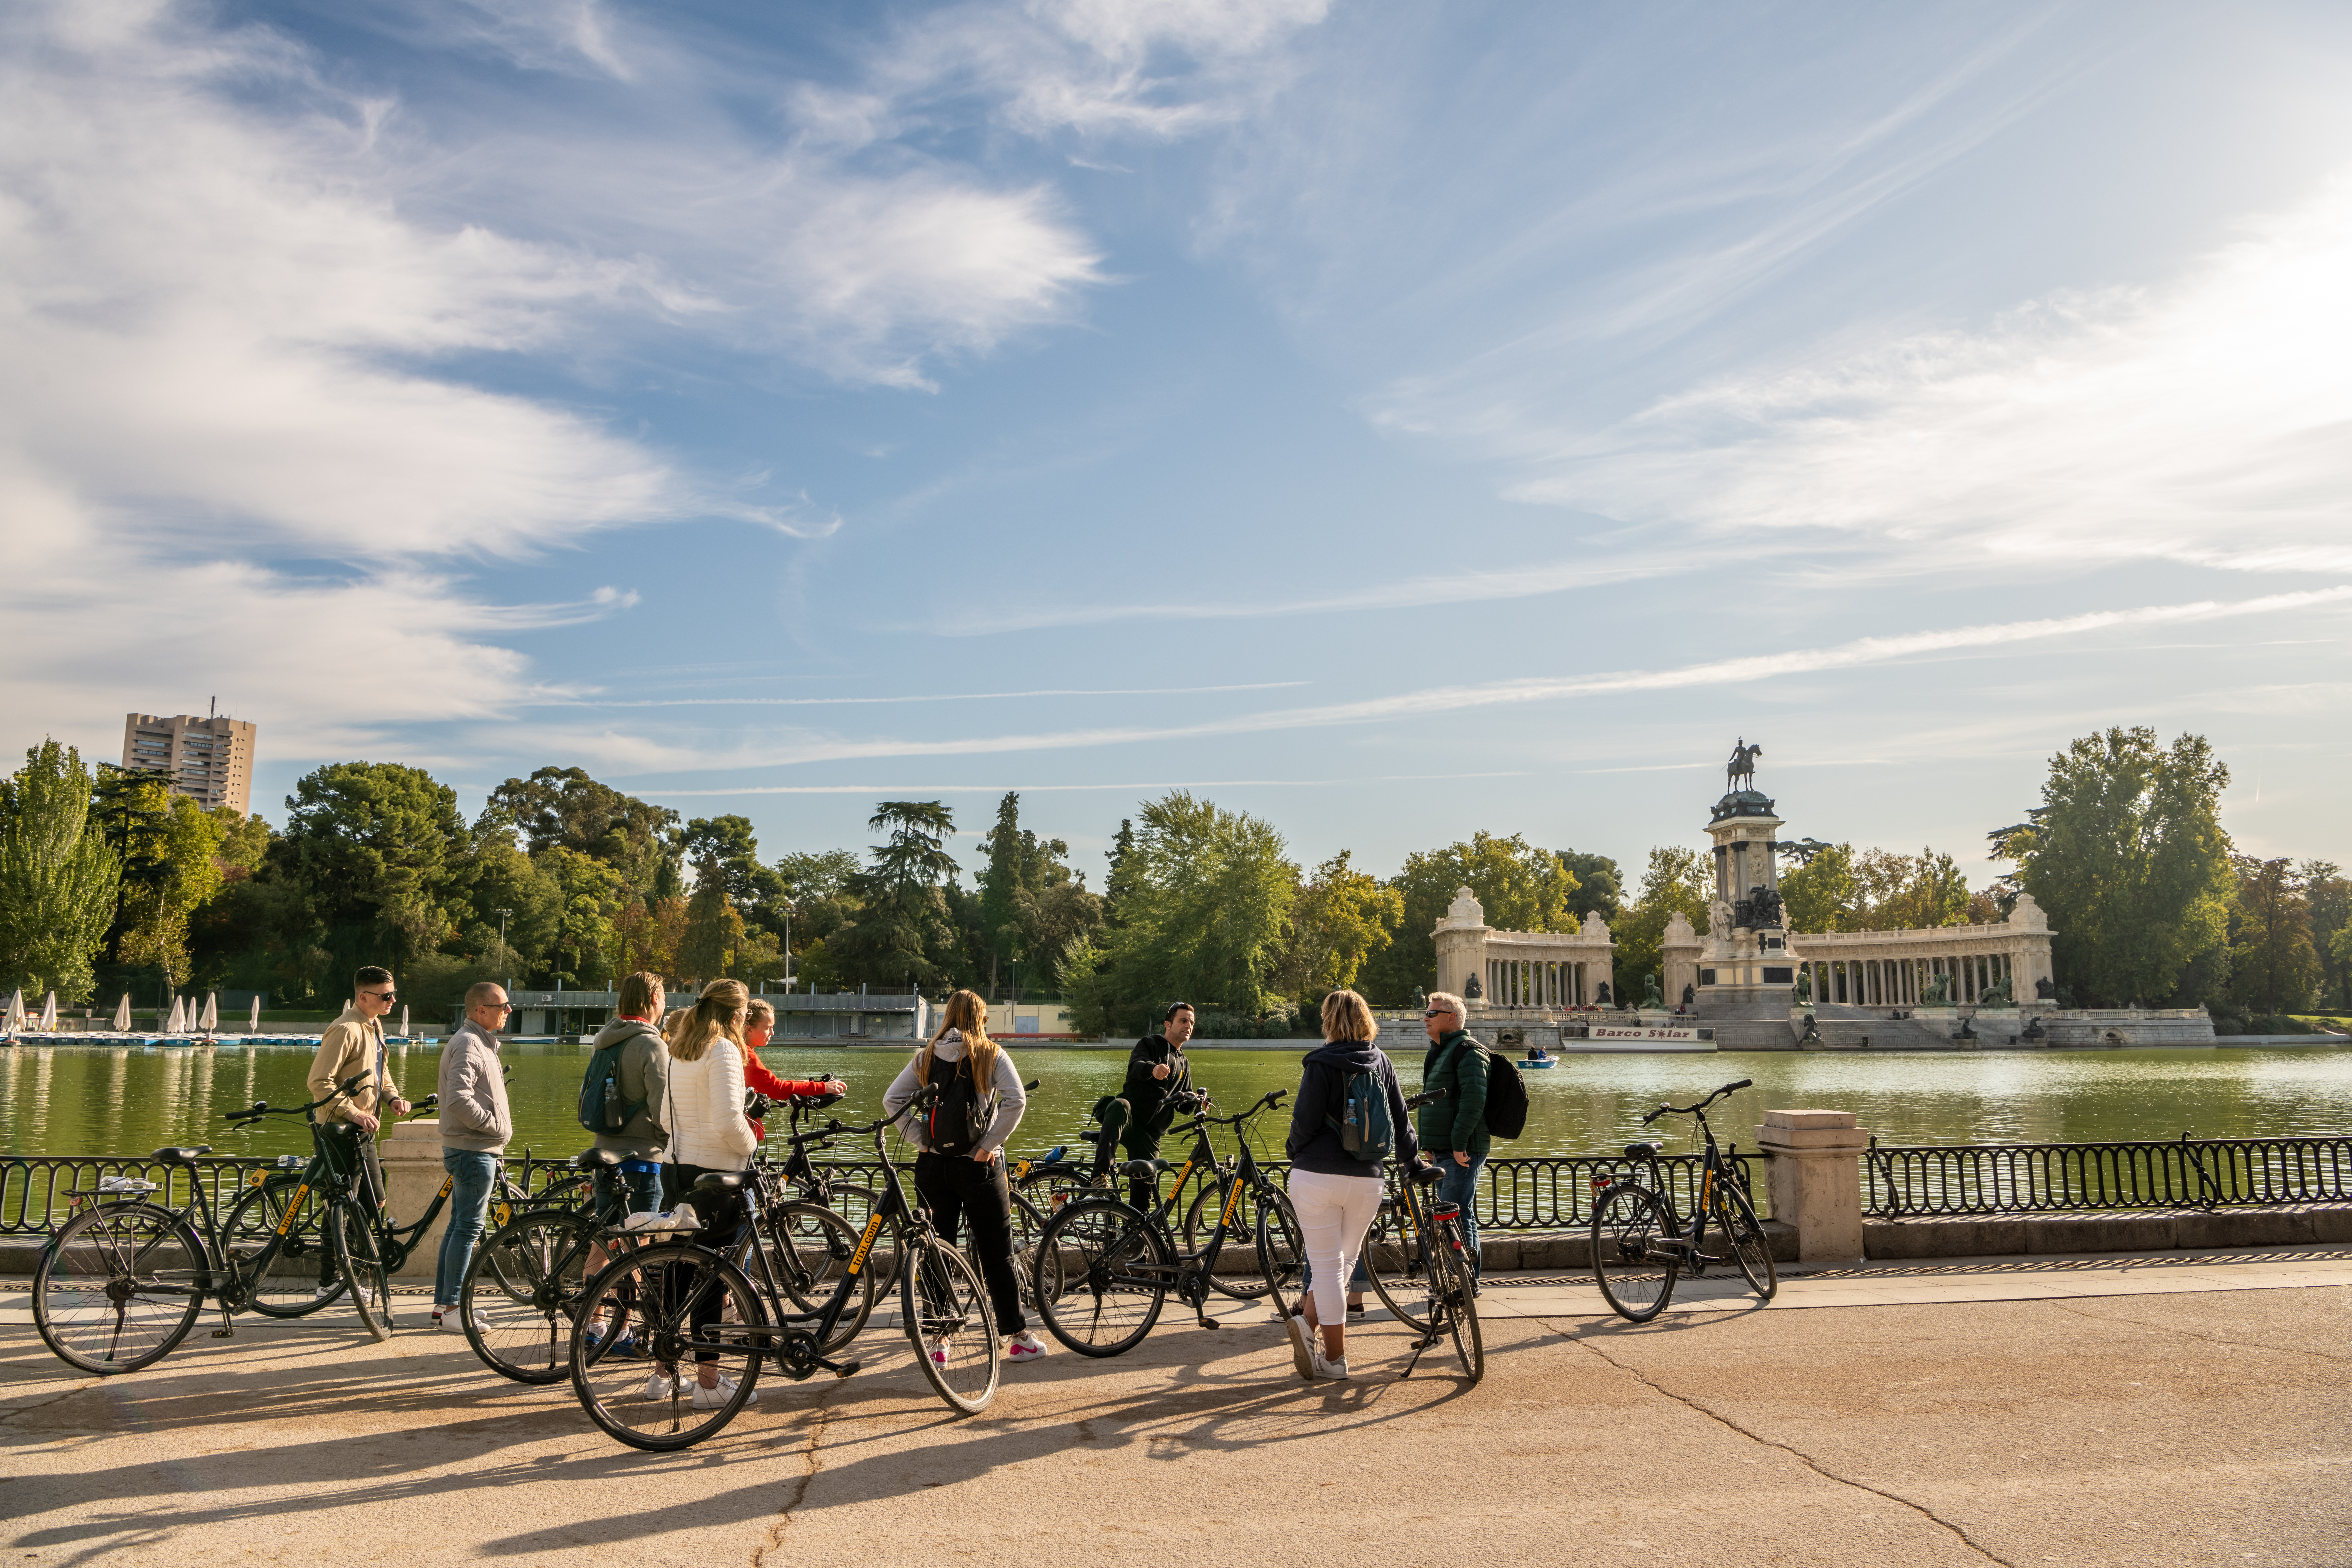 People begin a guided bicycle tour amidst the beautiful scenery in El Retiro Park, a popular and scenic park in central Madrid.